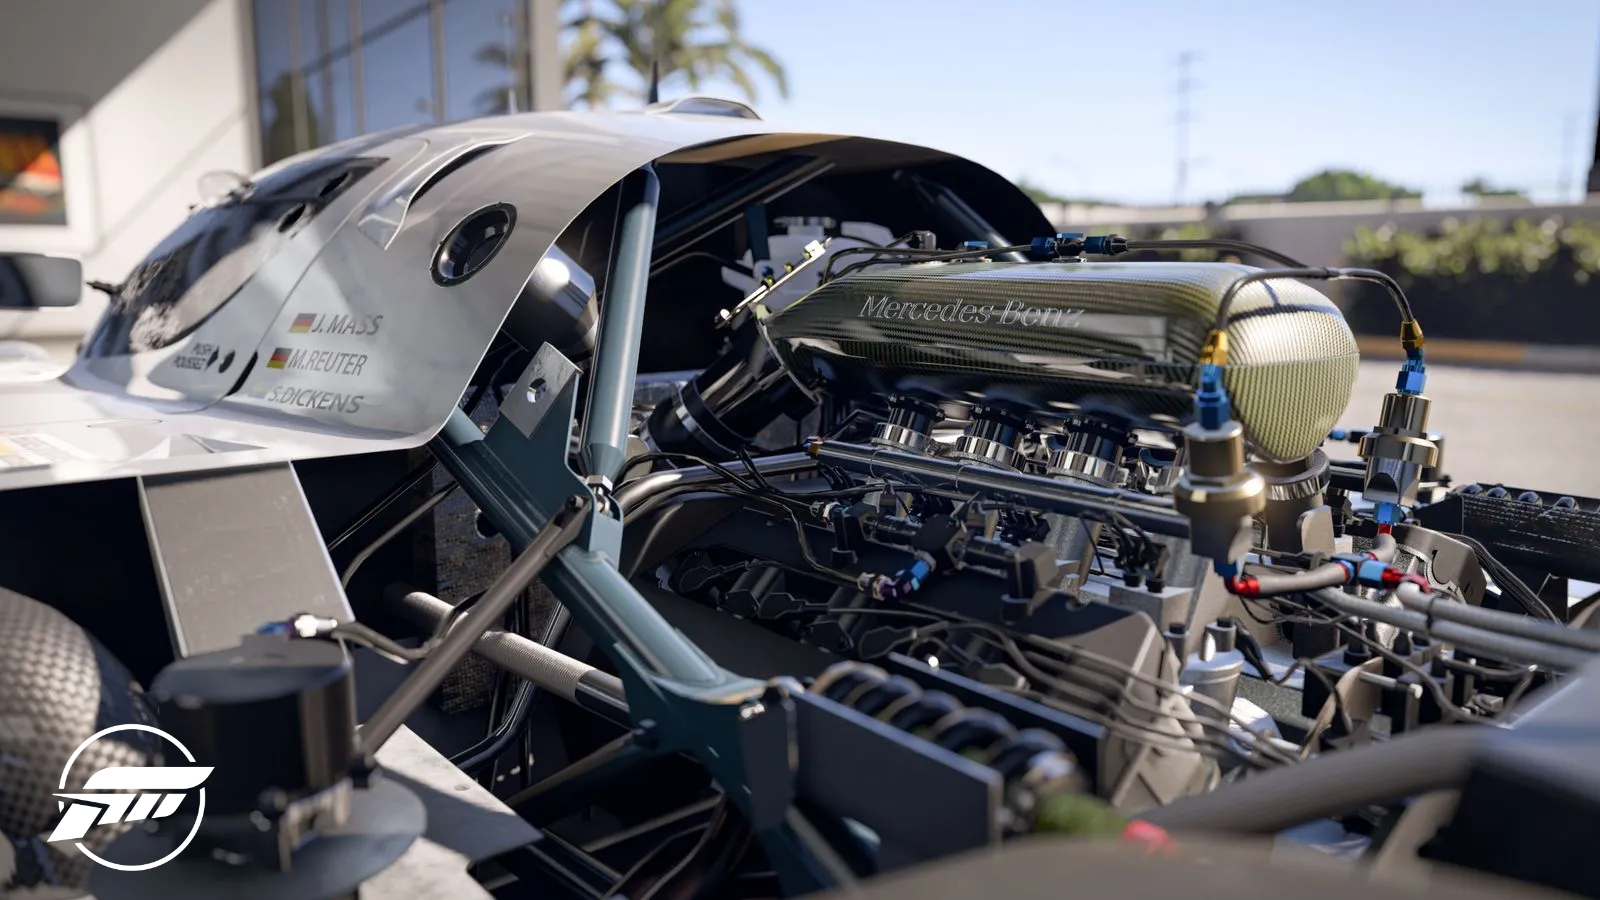 Marketing images from Forza Motorsport depicting an up close rendering of a Mercedes Benz engine.